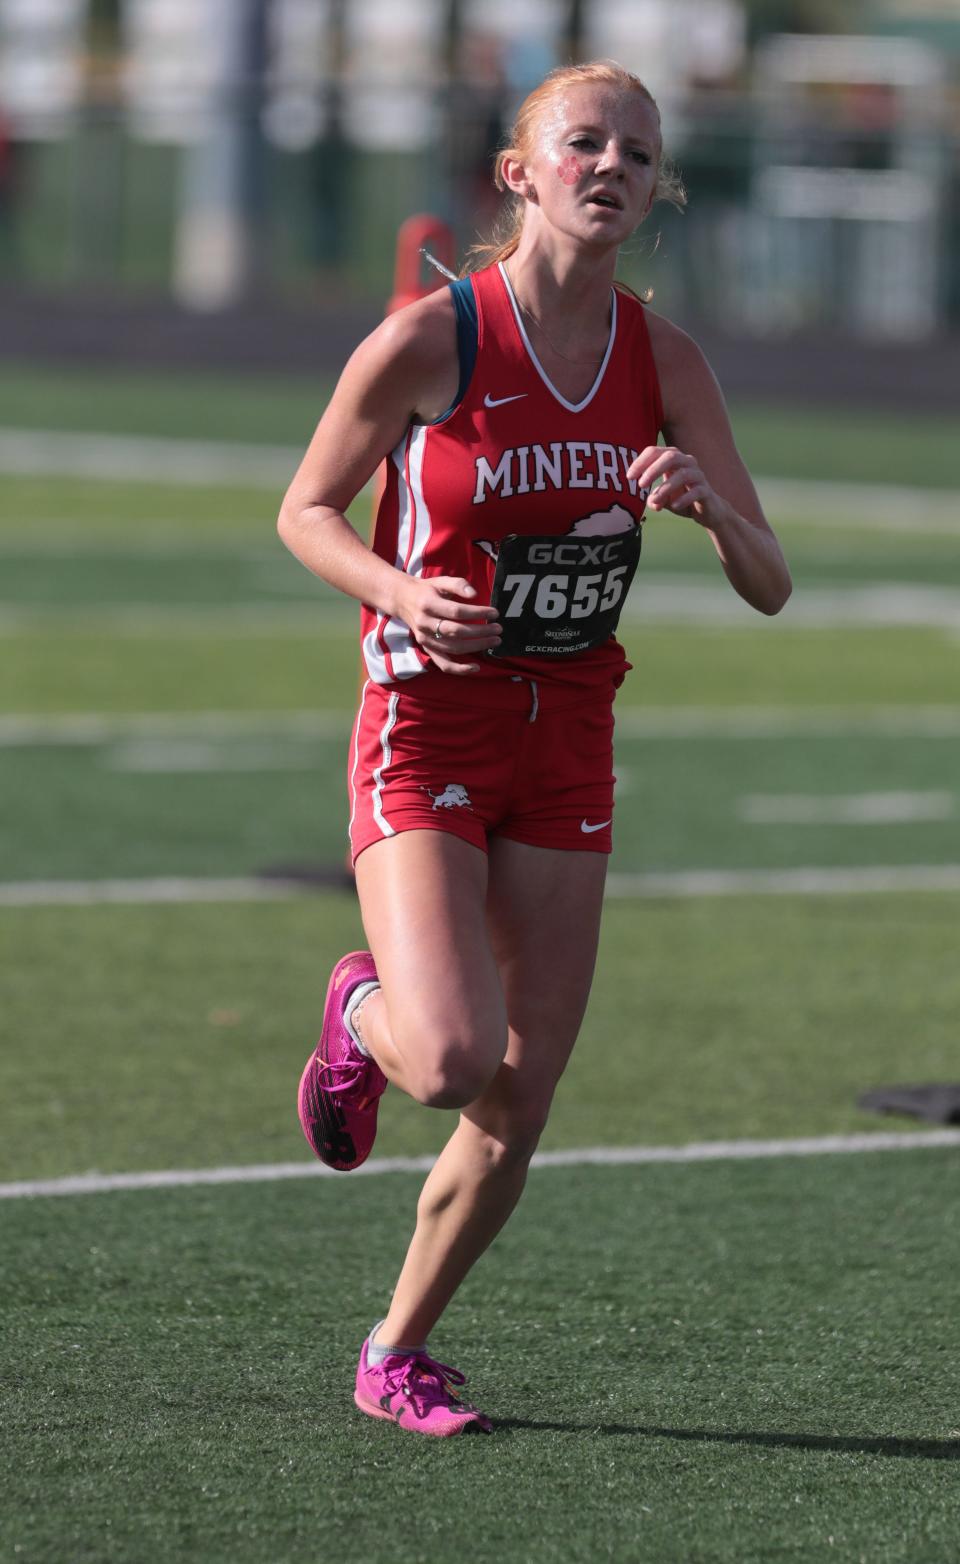 Hera Hoffee leads Minerva to the overall girls team title at Saturday's Stark County Cross Country Championships.